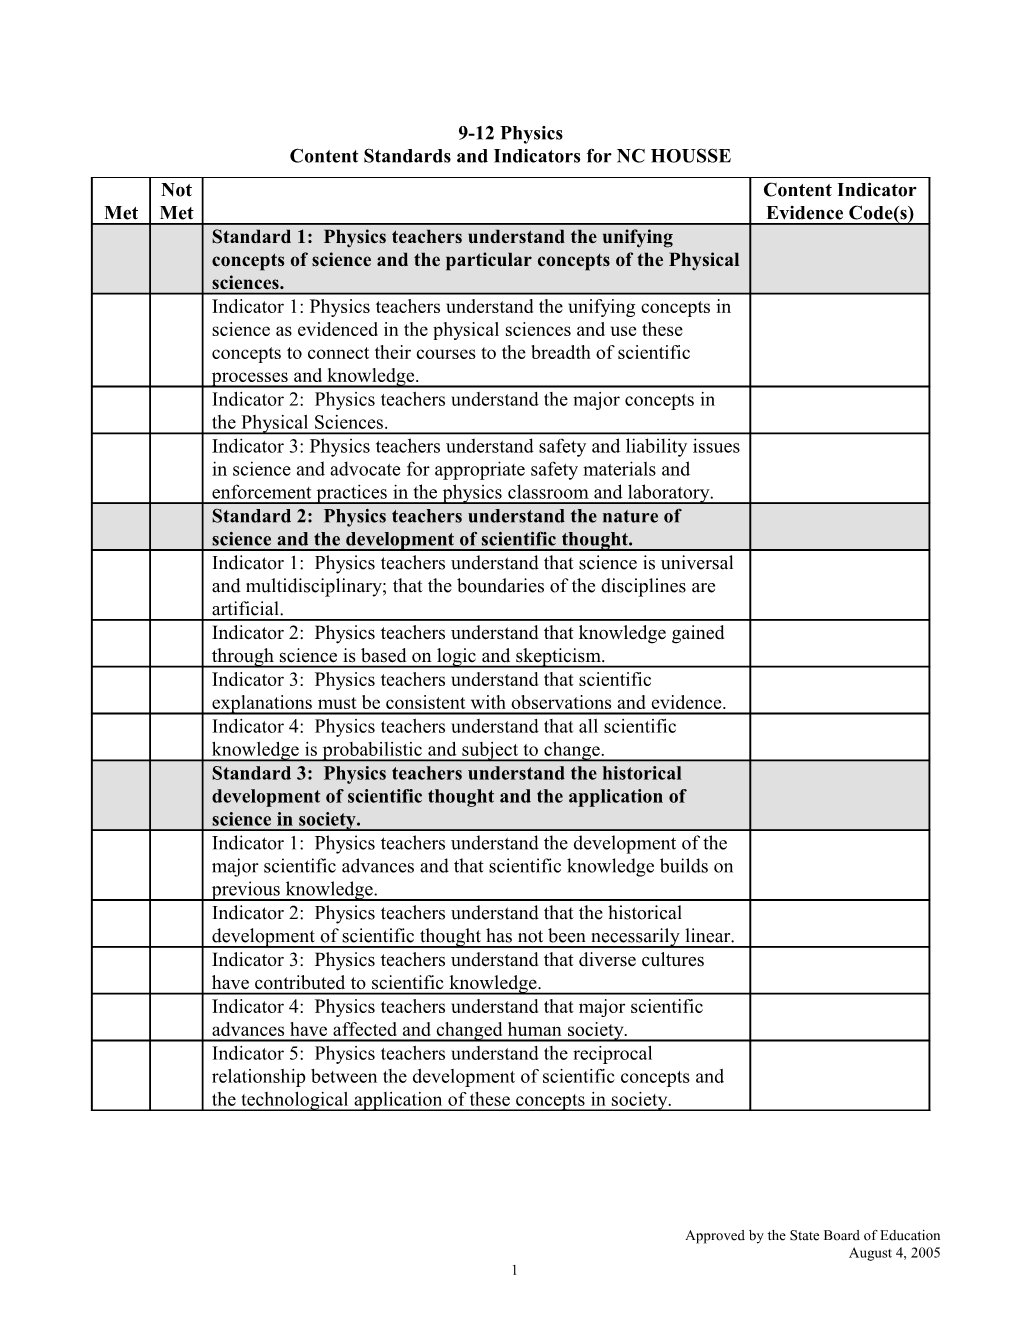 Content Standards and Indicators for NC HOUSSE